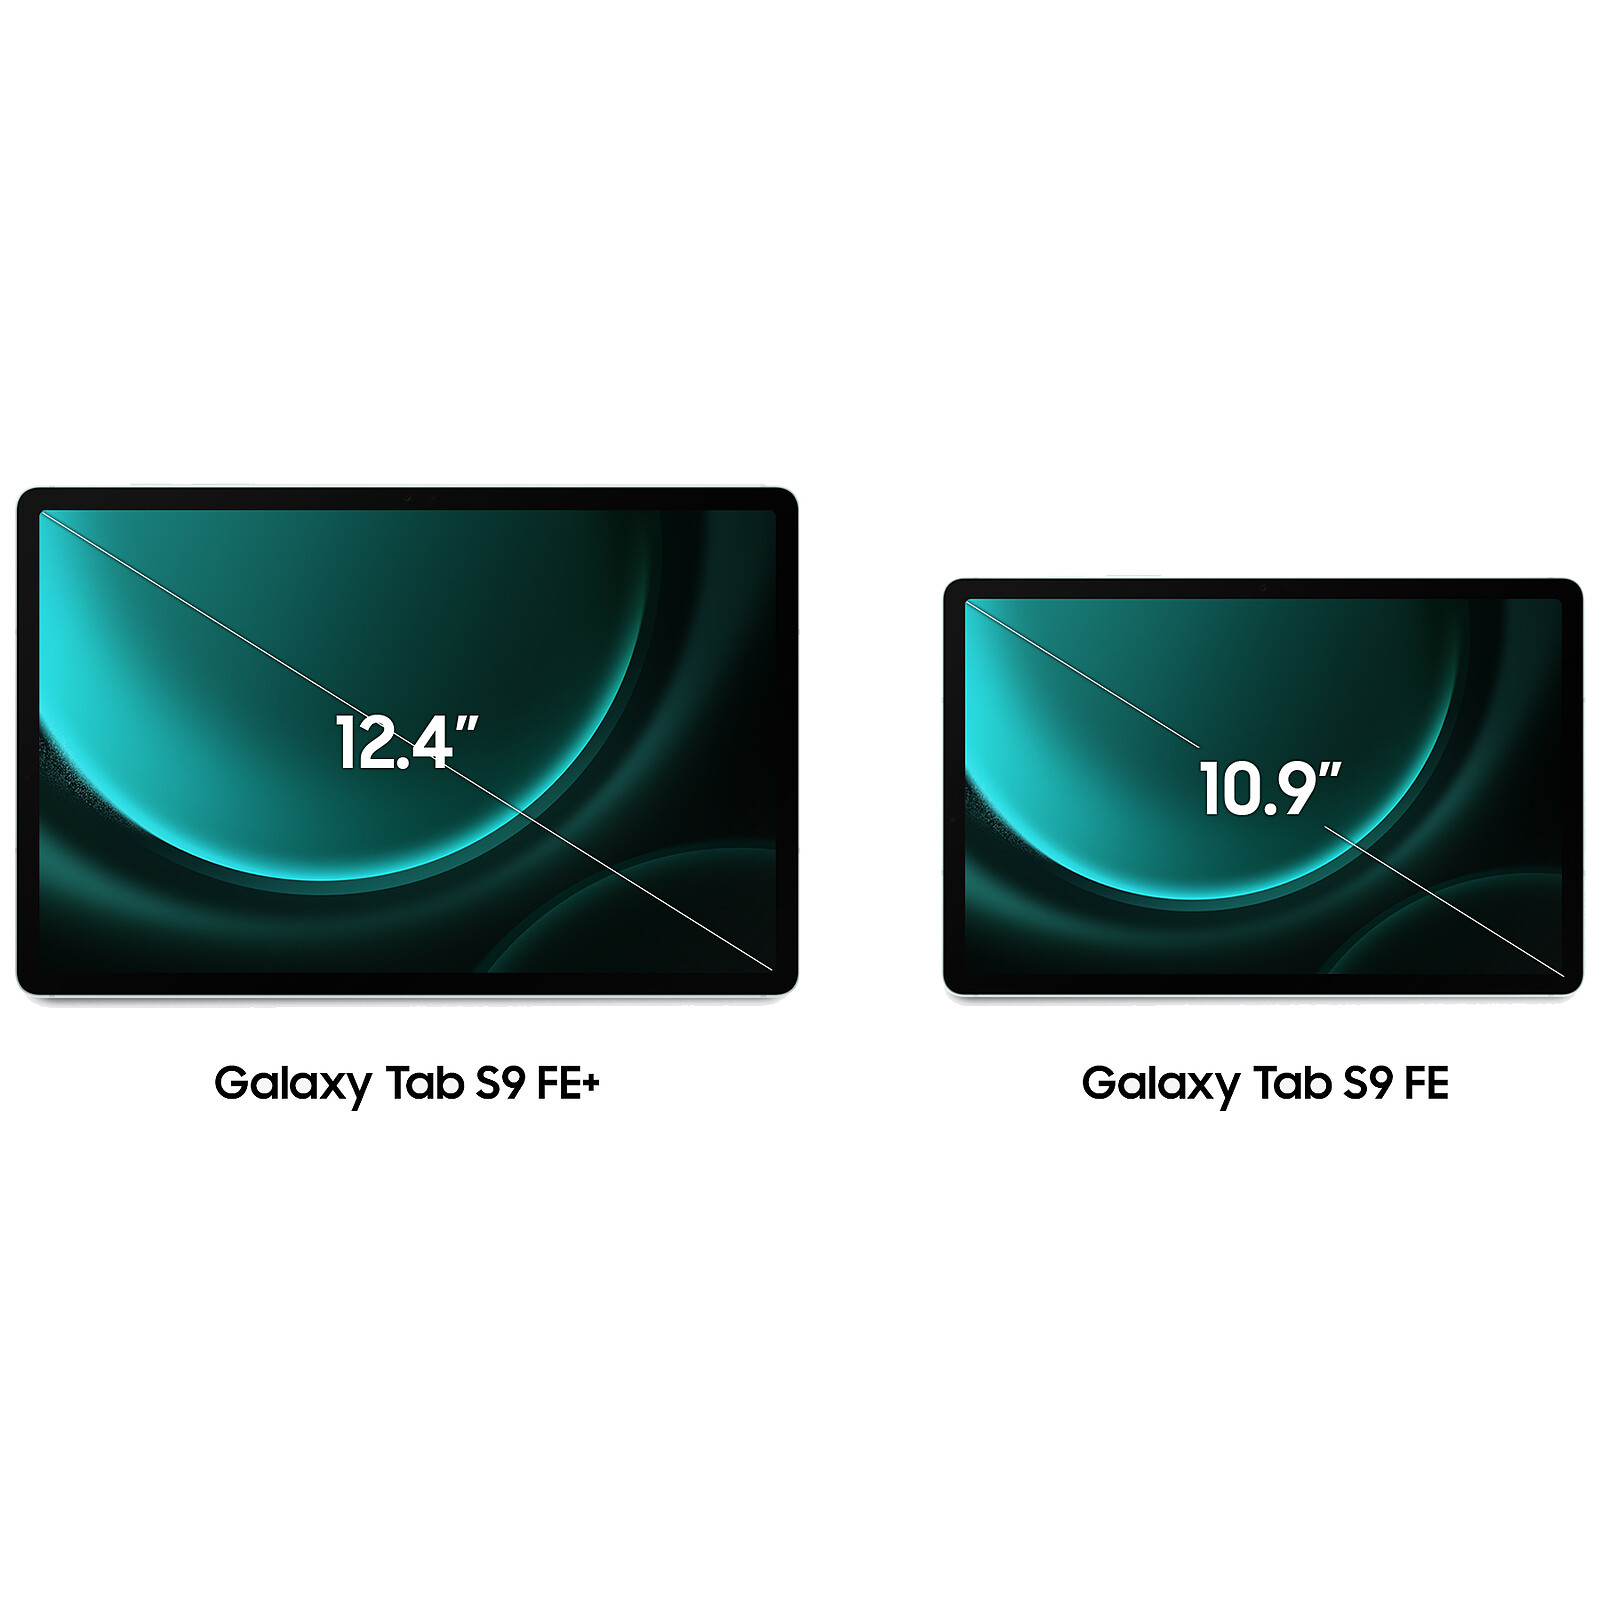 Tablette tactile Samsung Galaxy Tab S9 FE+ WiFi 128Go Argent - S Pen inlcus  - Samsung Galaxy Tab S9 FE+ WiFi 128Go Argent